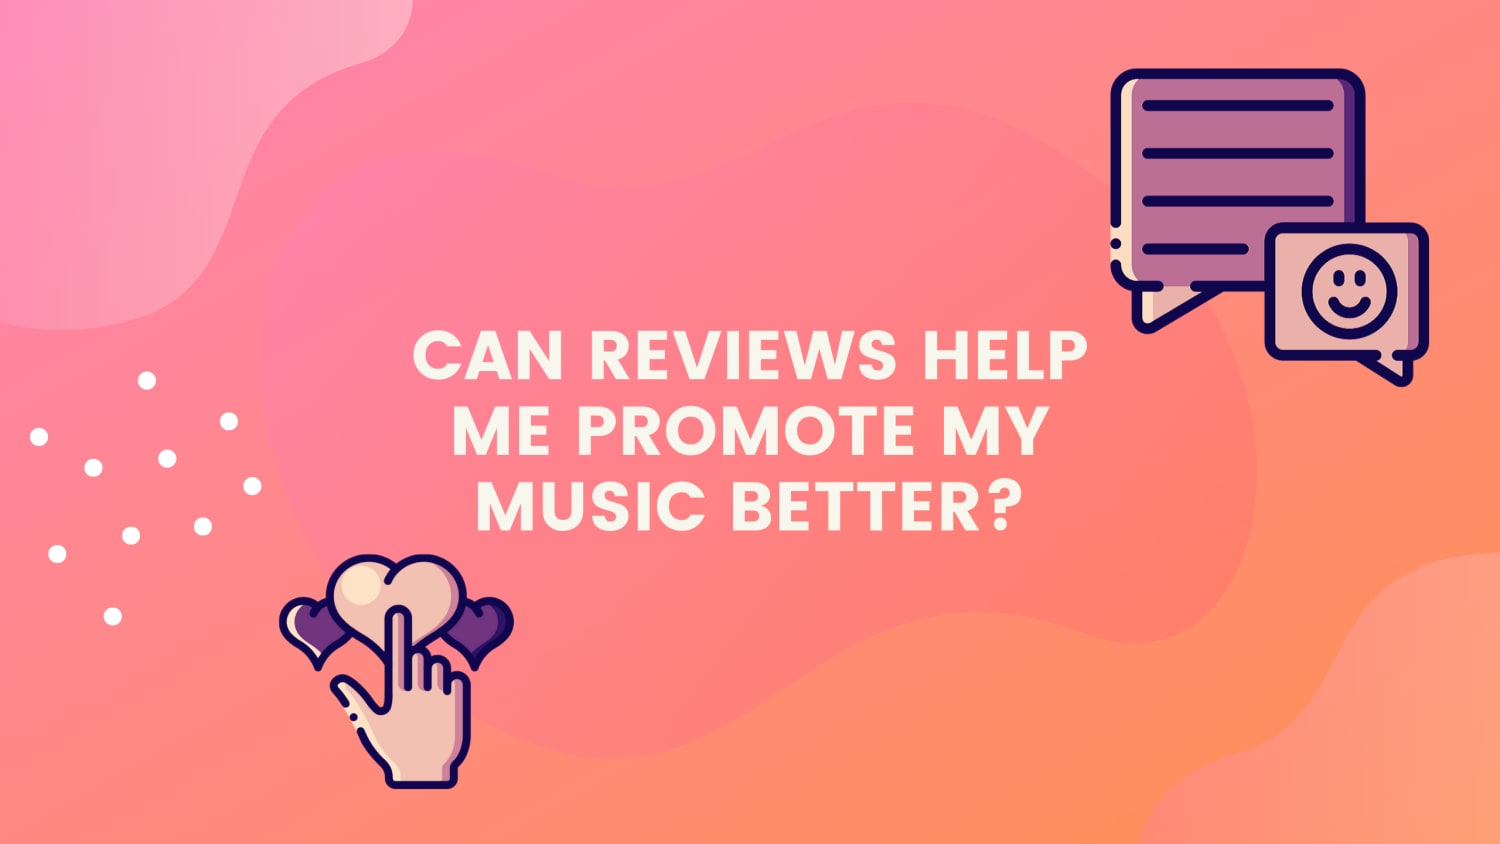 Can Reviews Help Me Promote My Music Better?